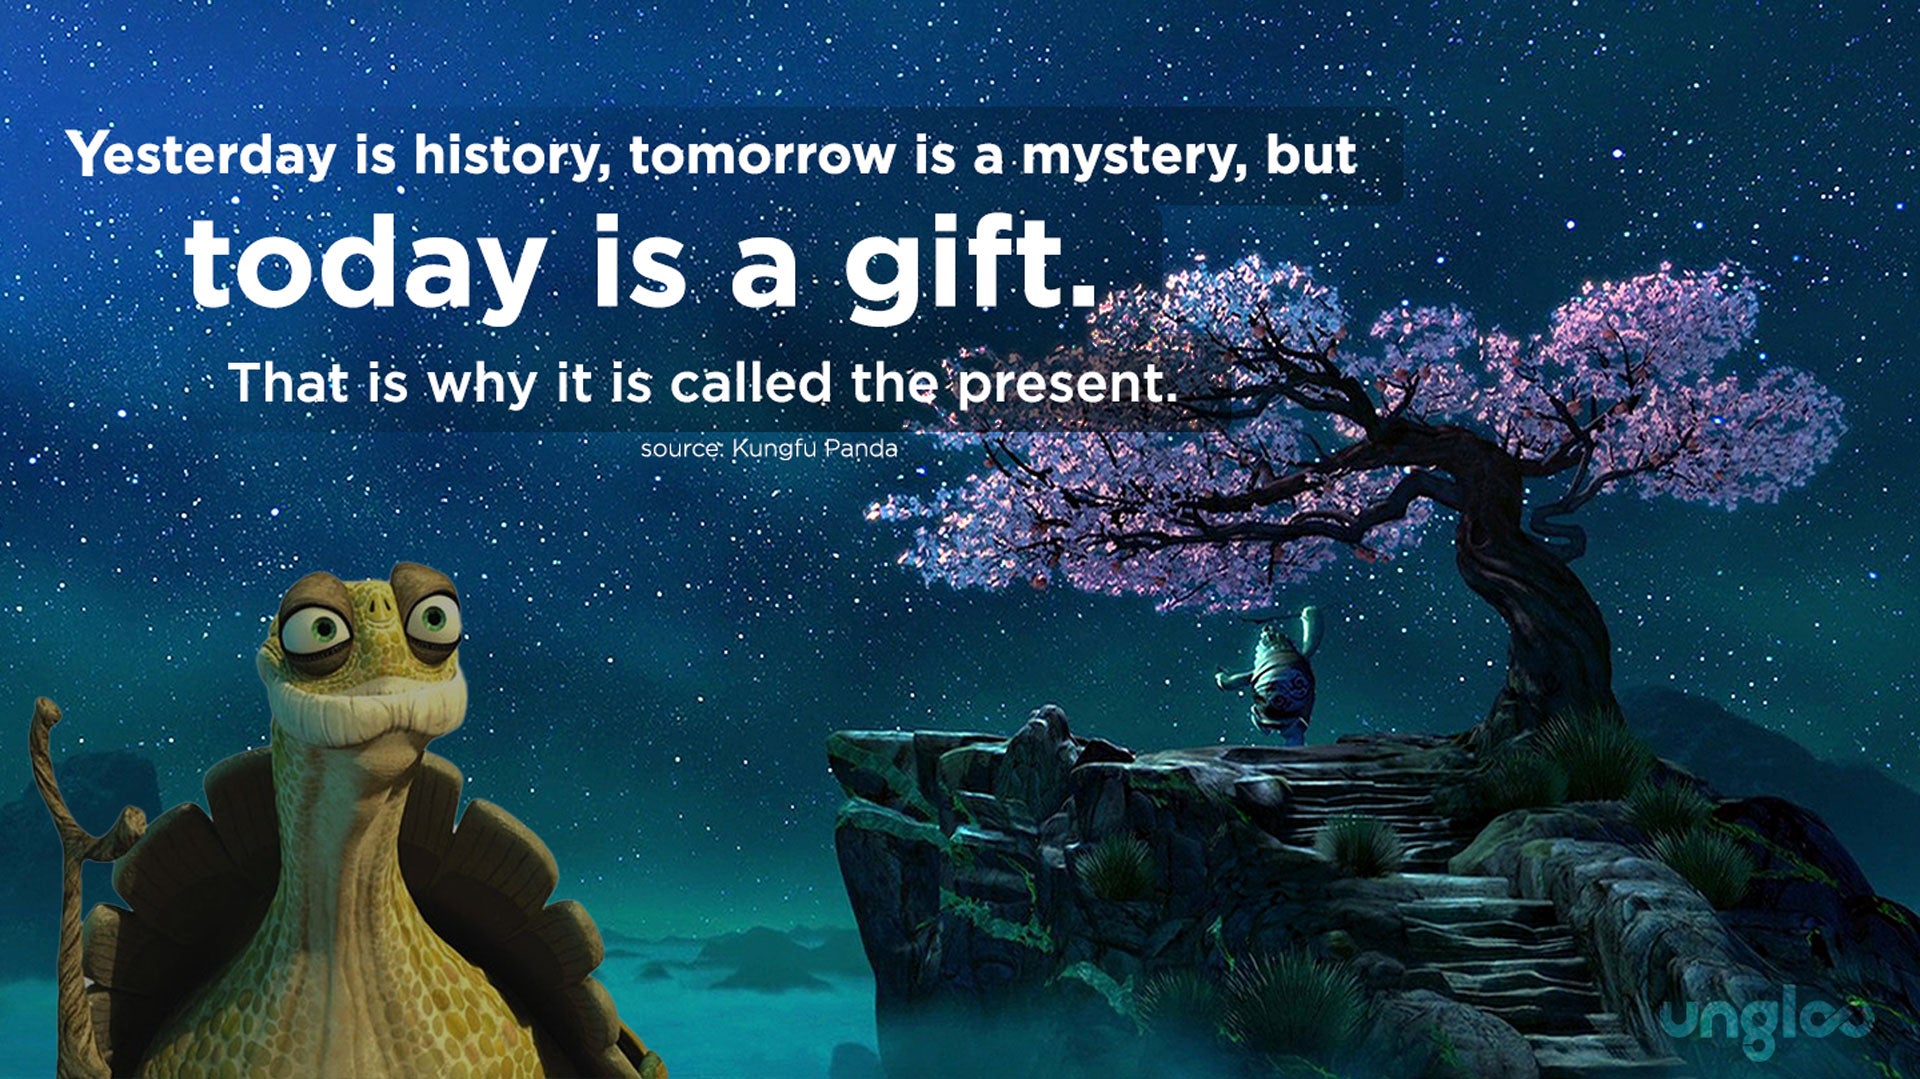 Ooway Kungful Panda tells us that Today is a Gift, reduce anxiety with mindfulness